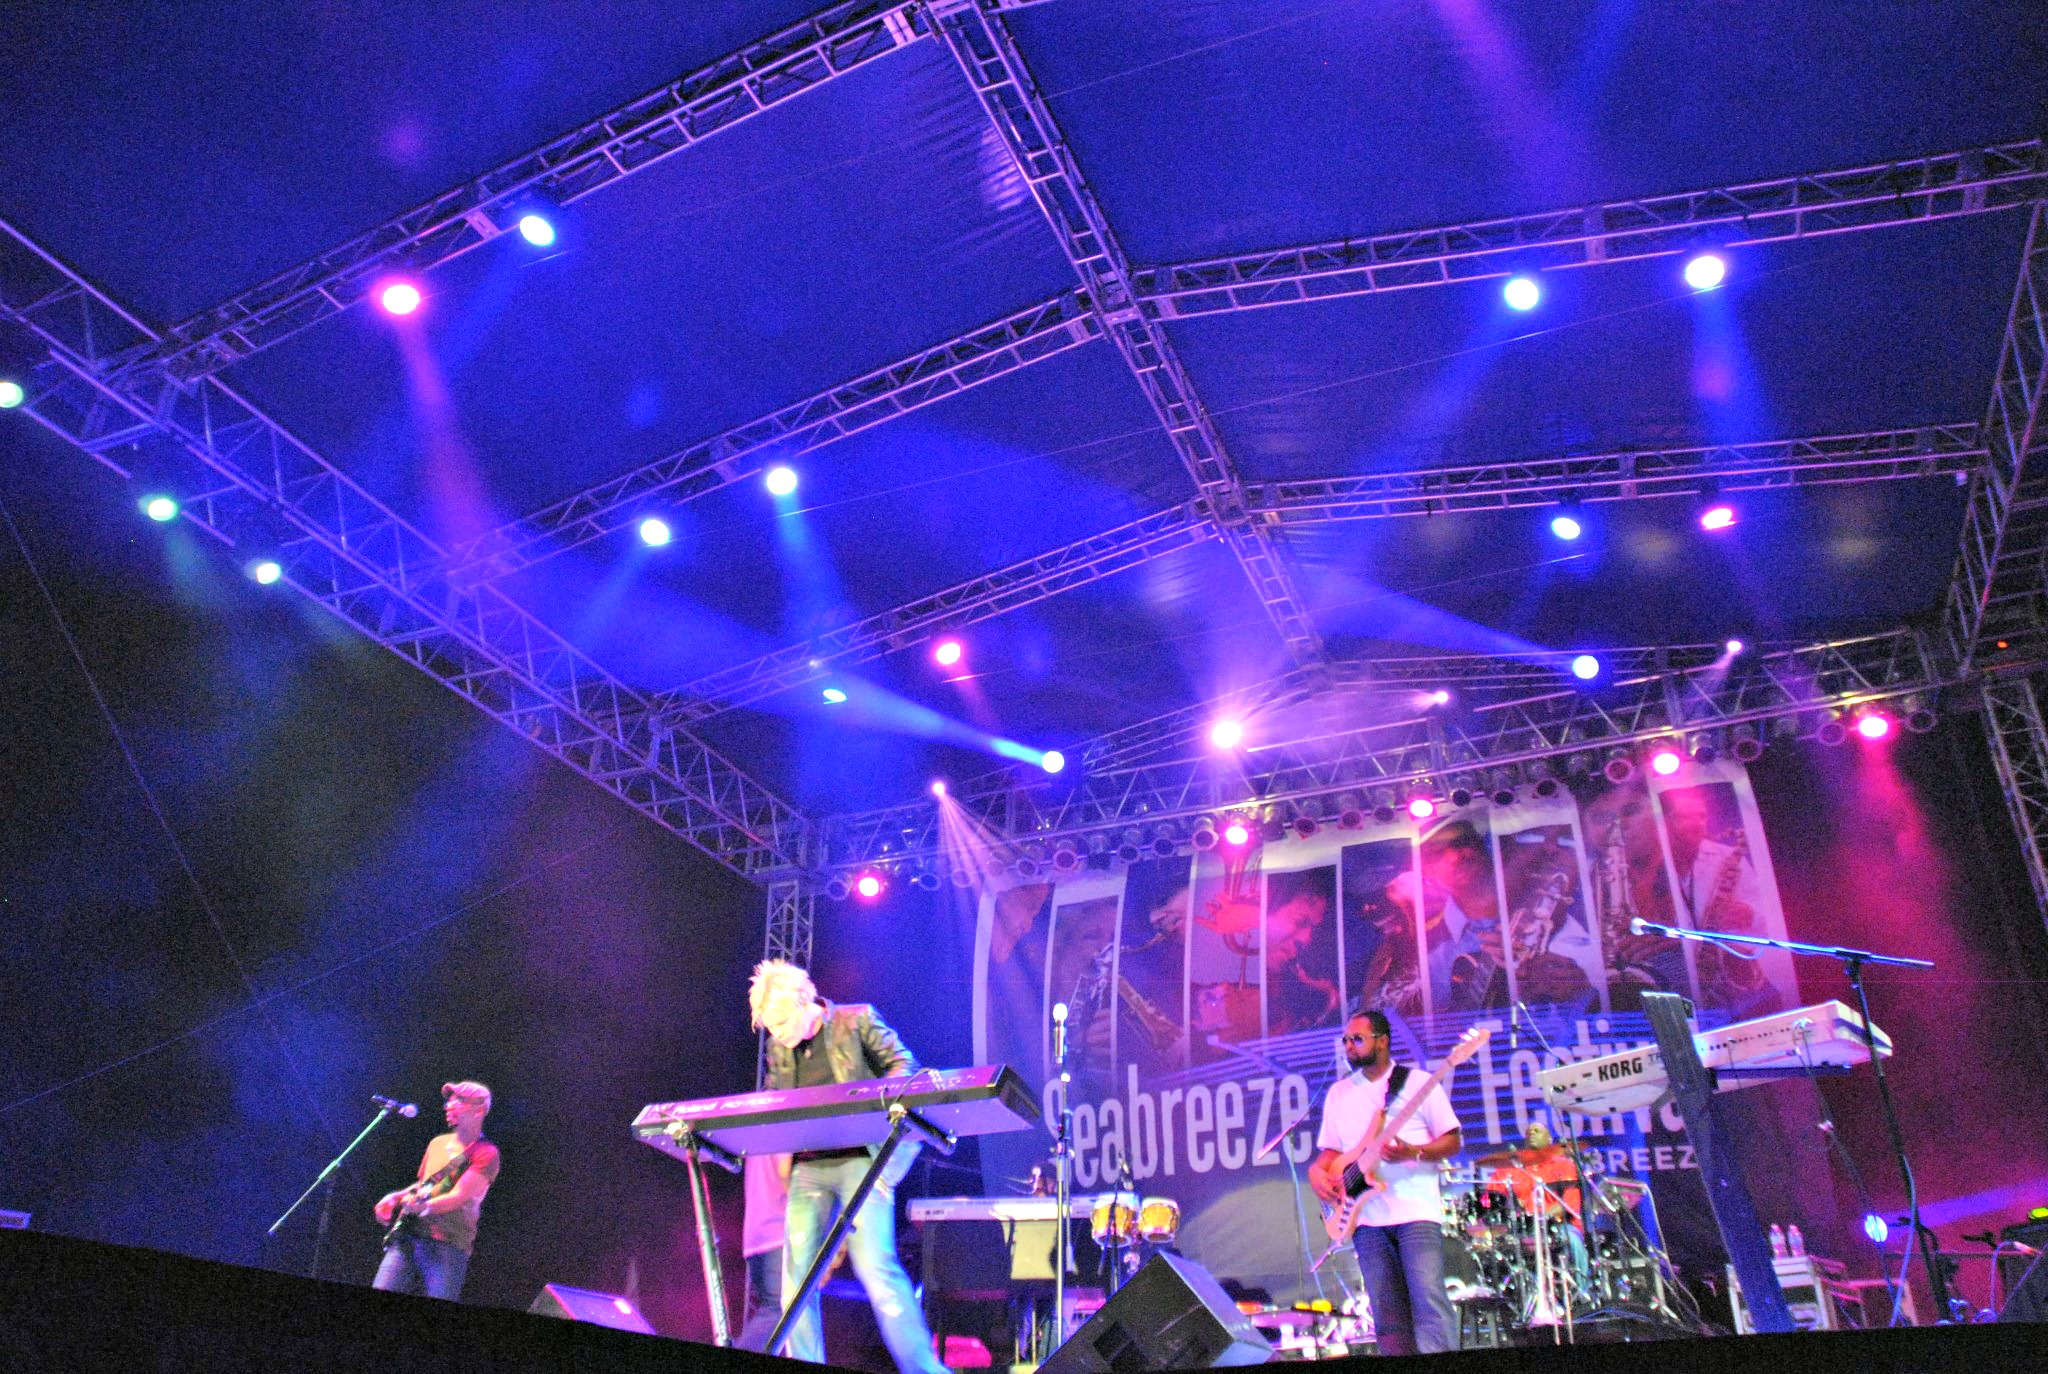 Brian Culbertson and his band performing at the Seabreeze Jazz Festival in Panama City Beach